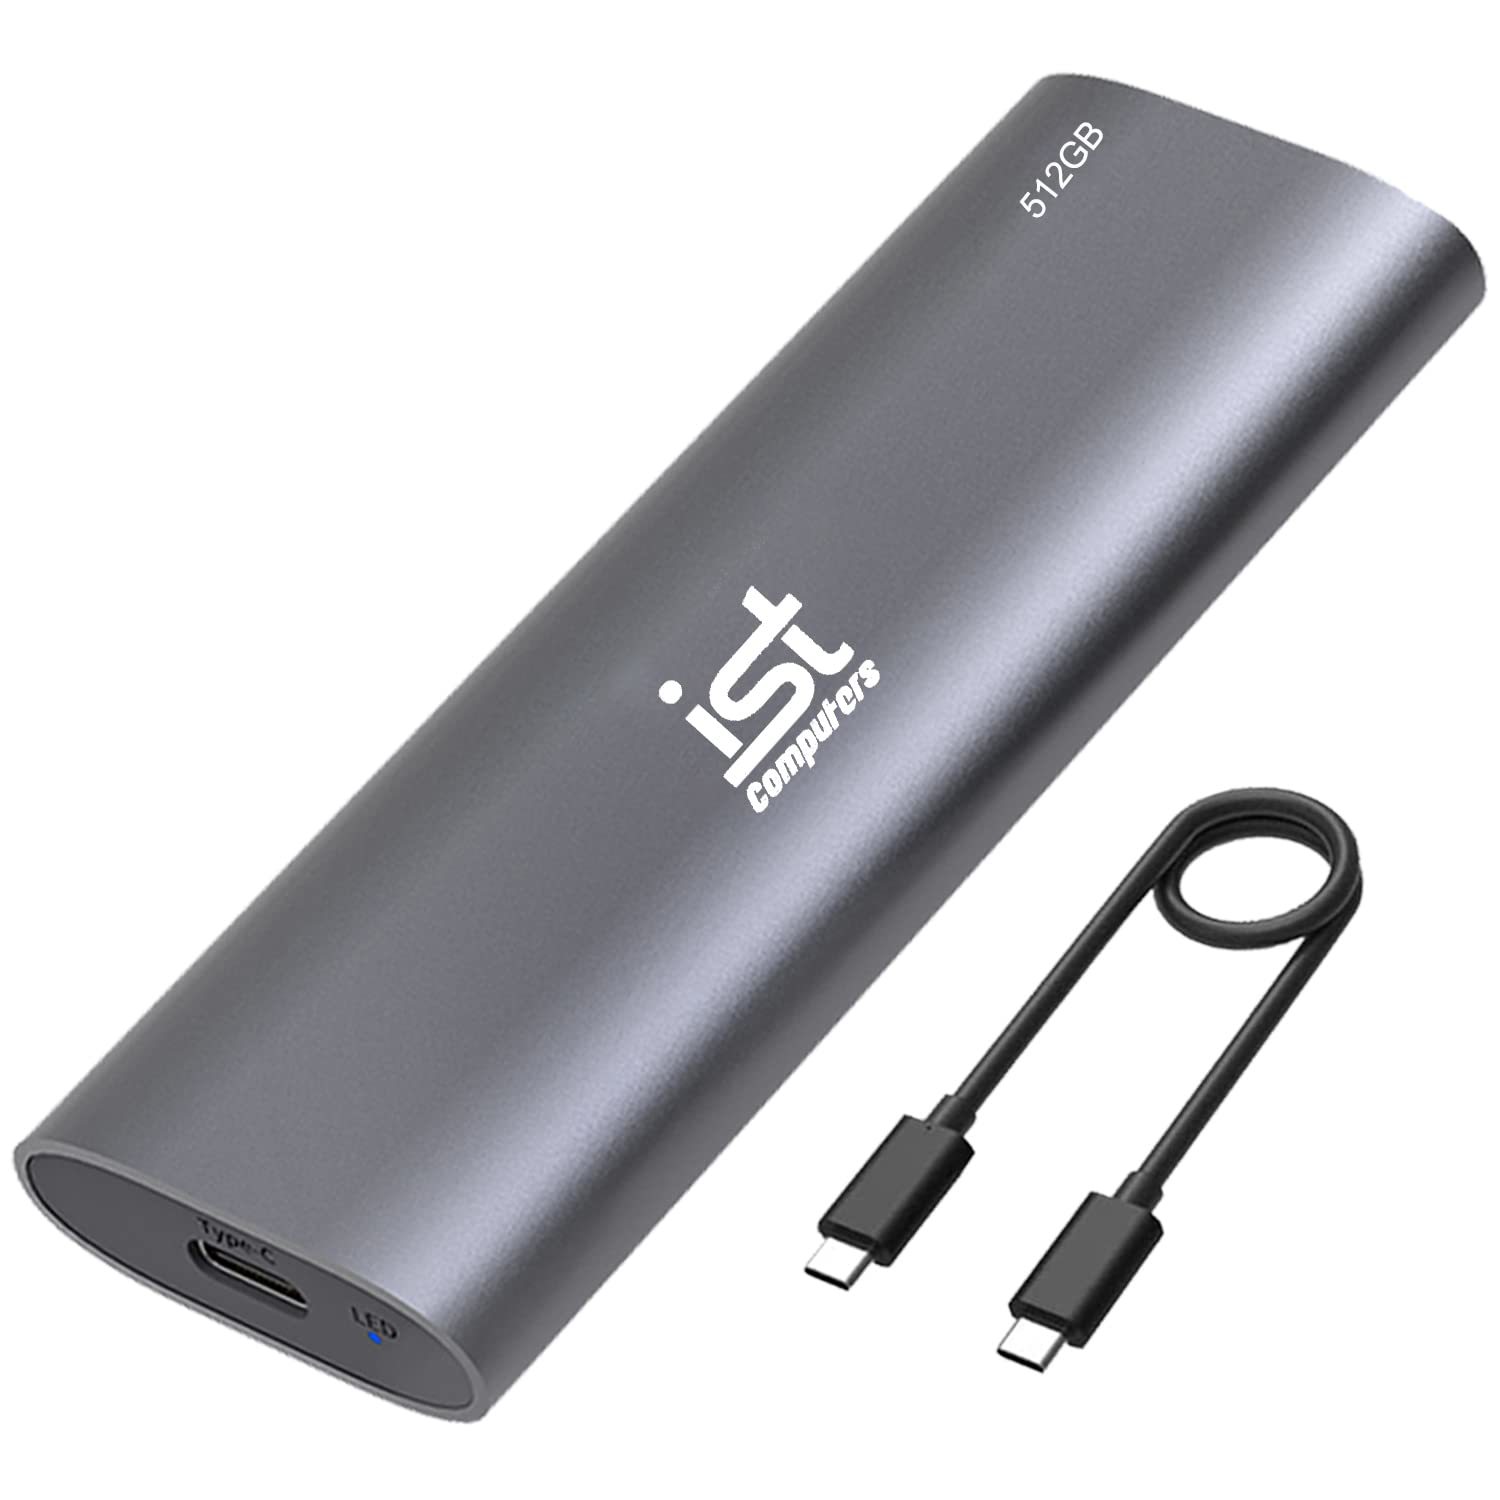 Ist Ultra Speed 512Gb Portable Ssd With Kingston, Kioxia, Micron Pcie Ssd, Up To - $101.99